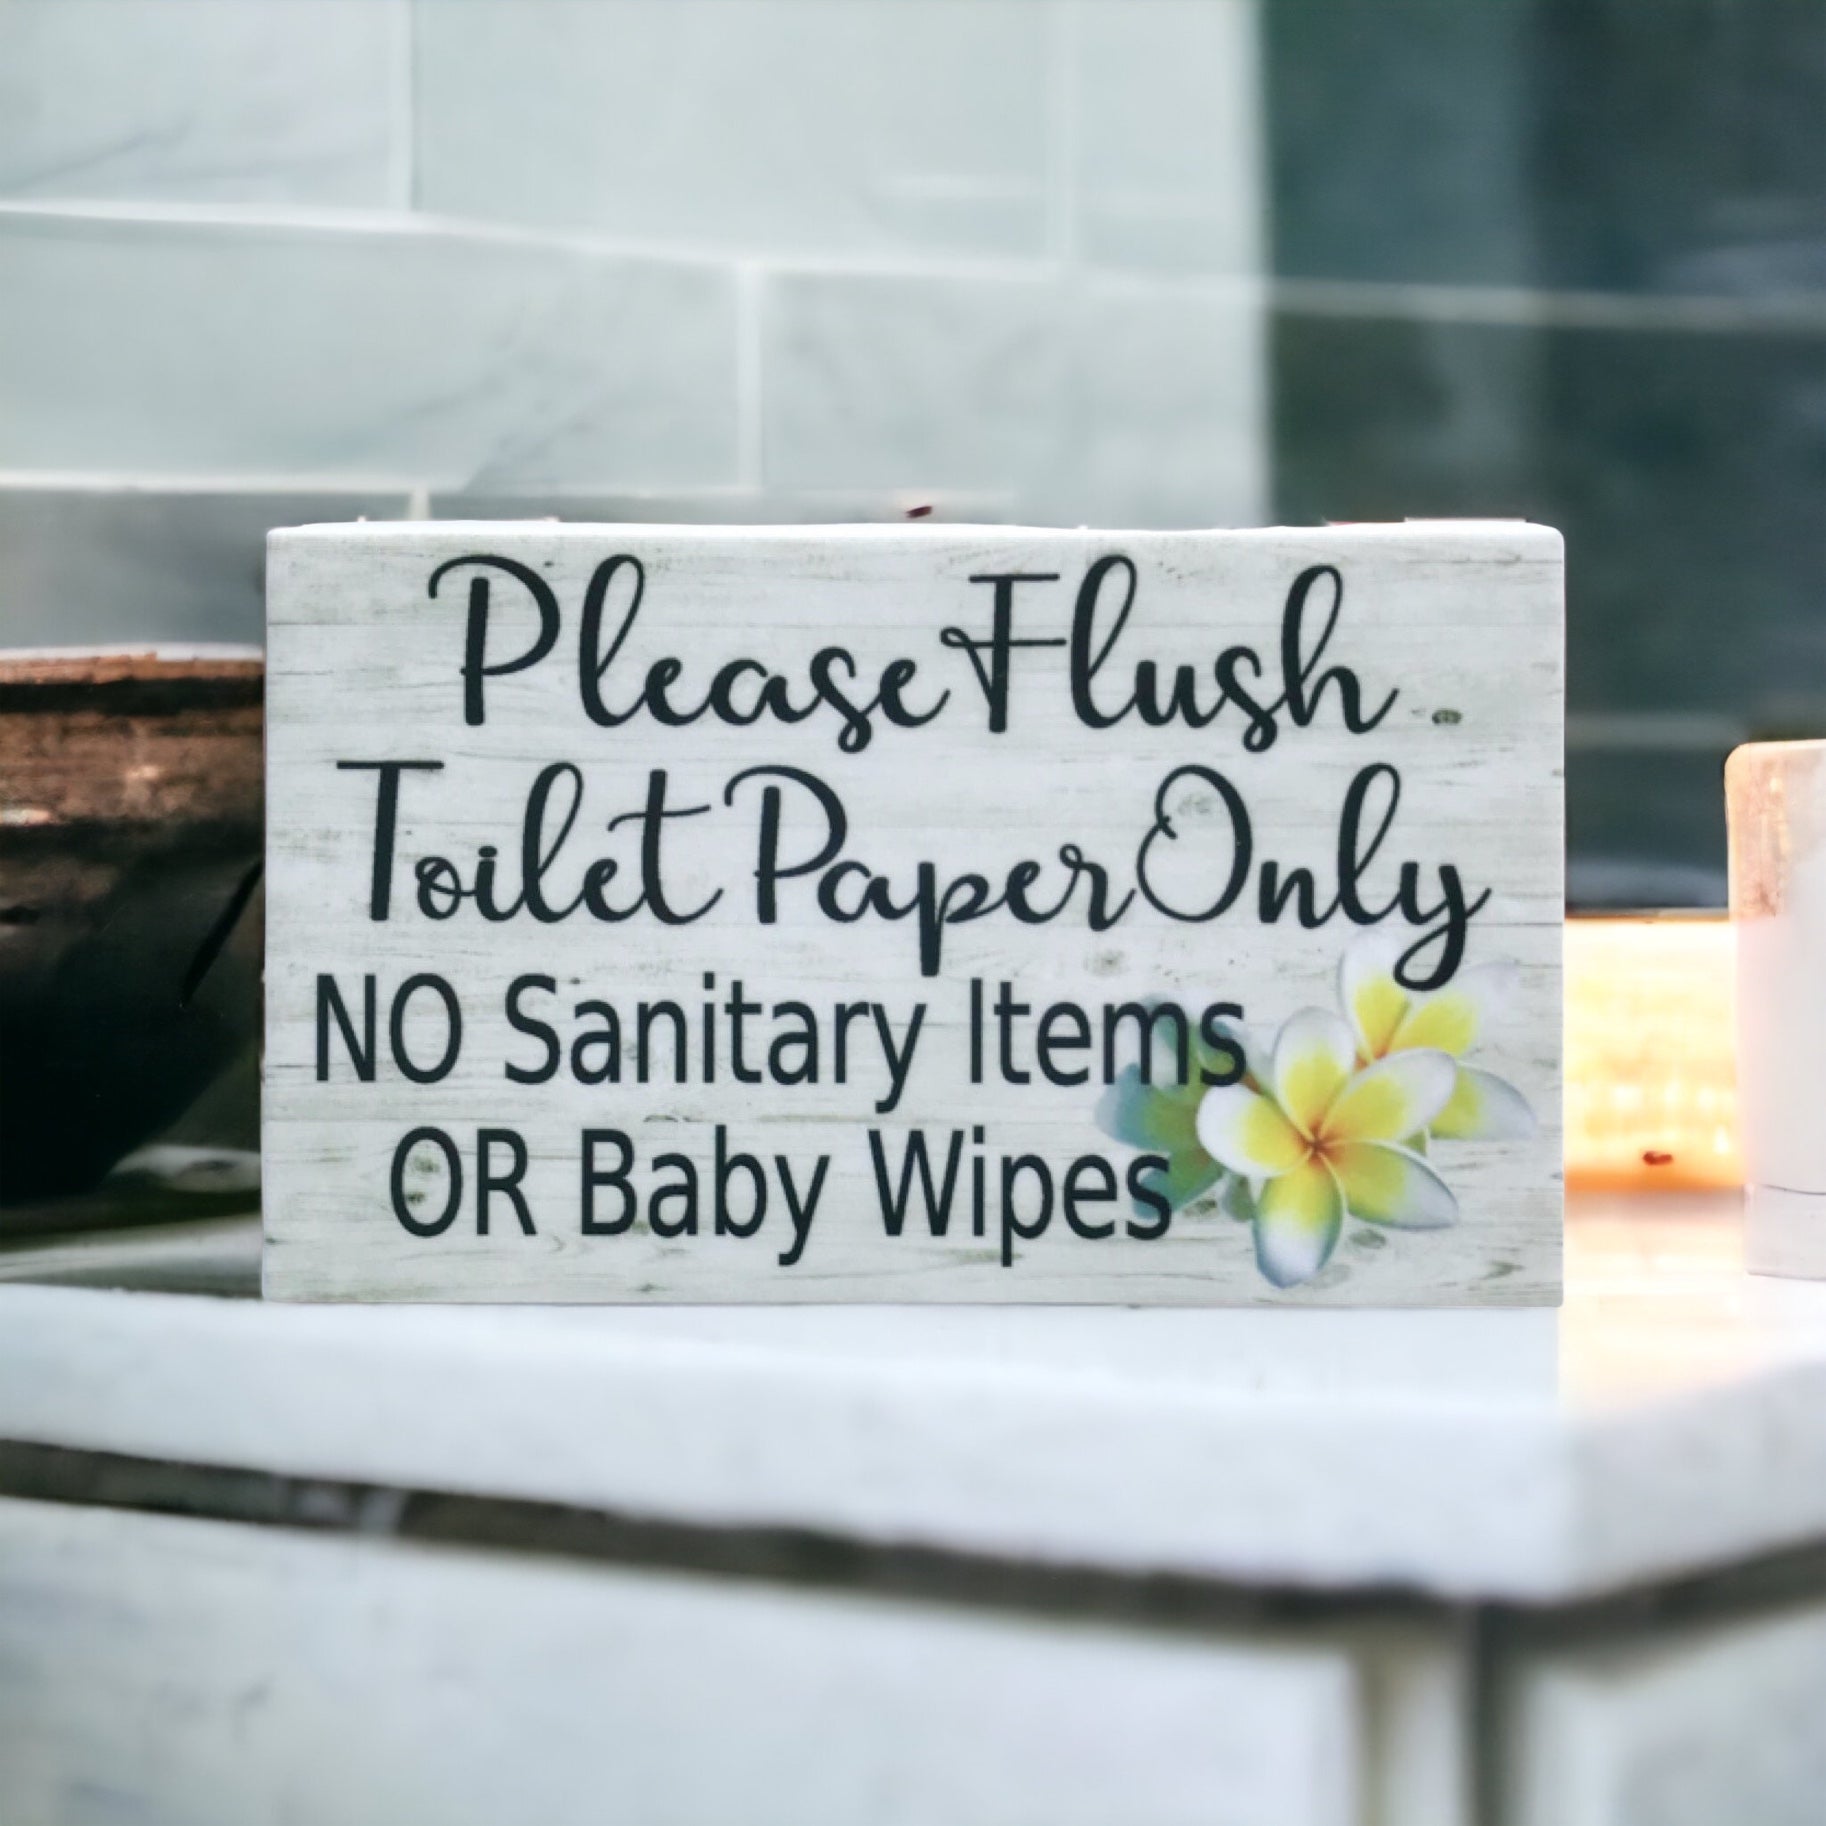 Flush Toilet Paper Only No Sanitary Frangipani Sign - The Renmy Store Homewares & Gifts 